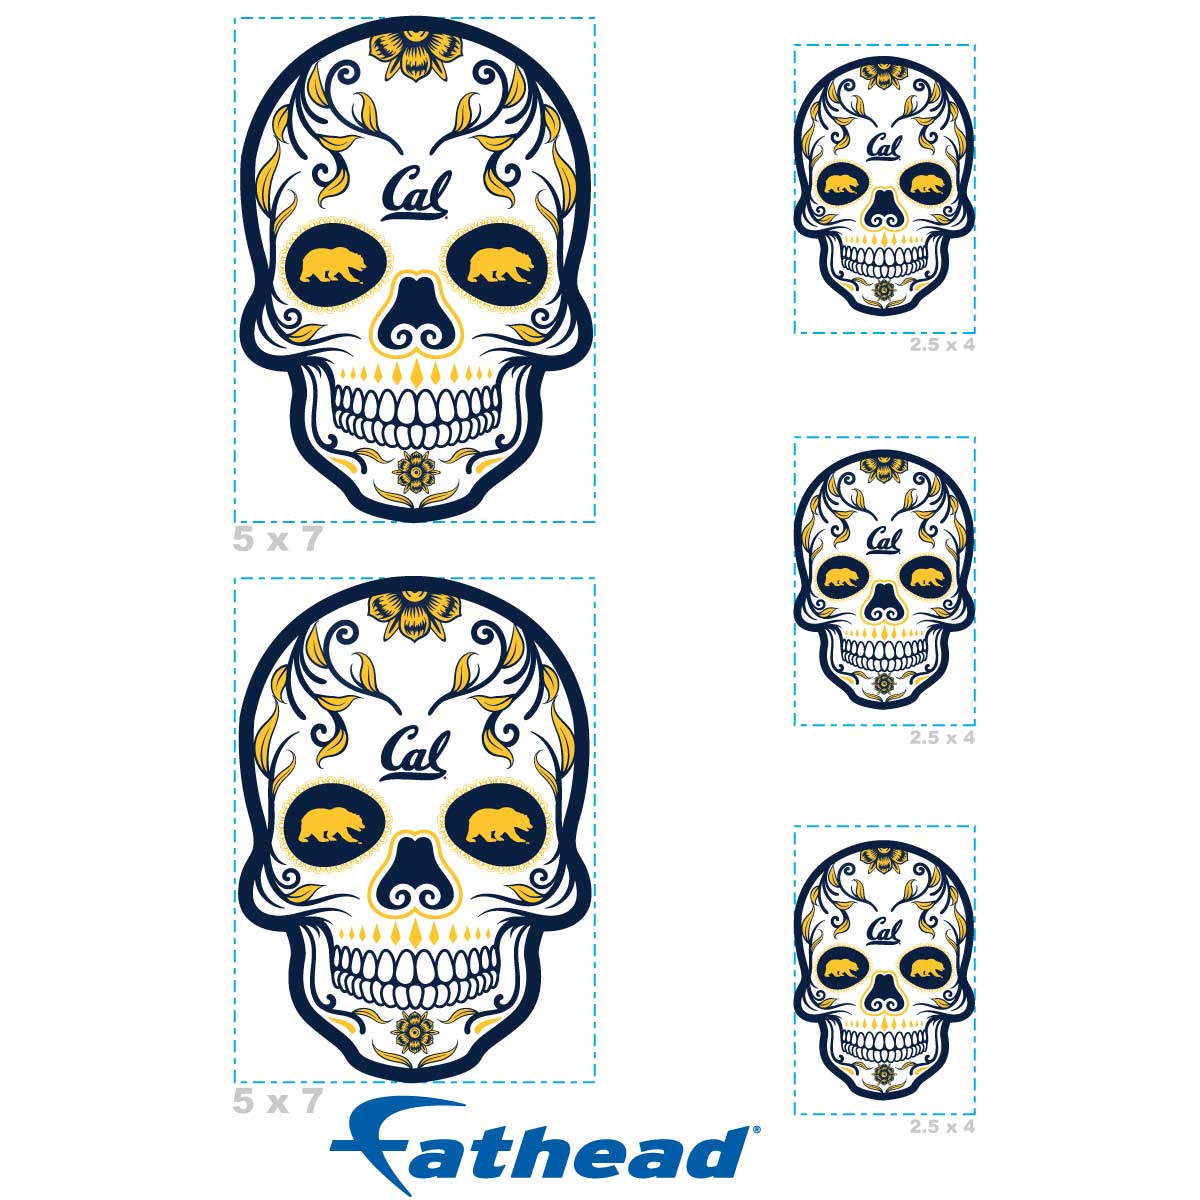 Sheet of 5 -California Golden Bears: Skull Minis - Officially Licensed NCAA Removable Adhesive Decal